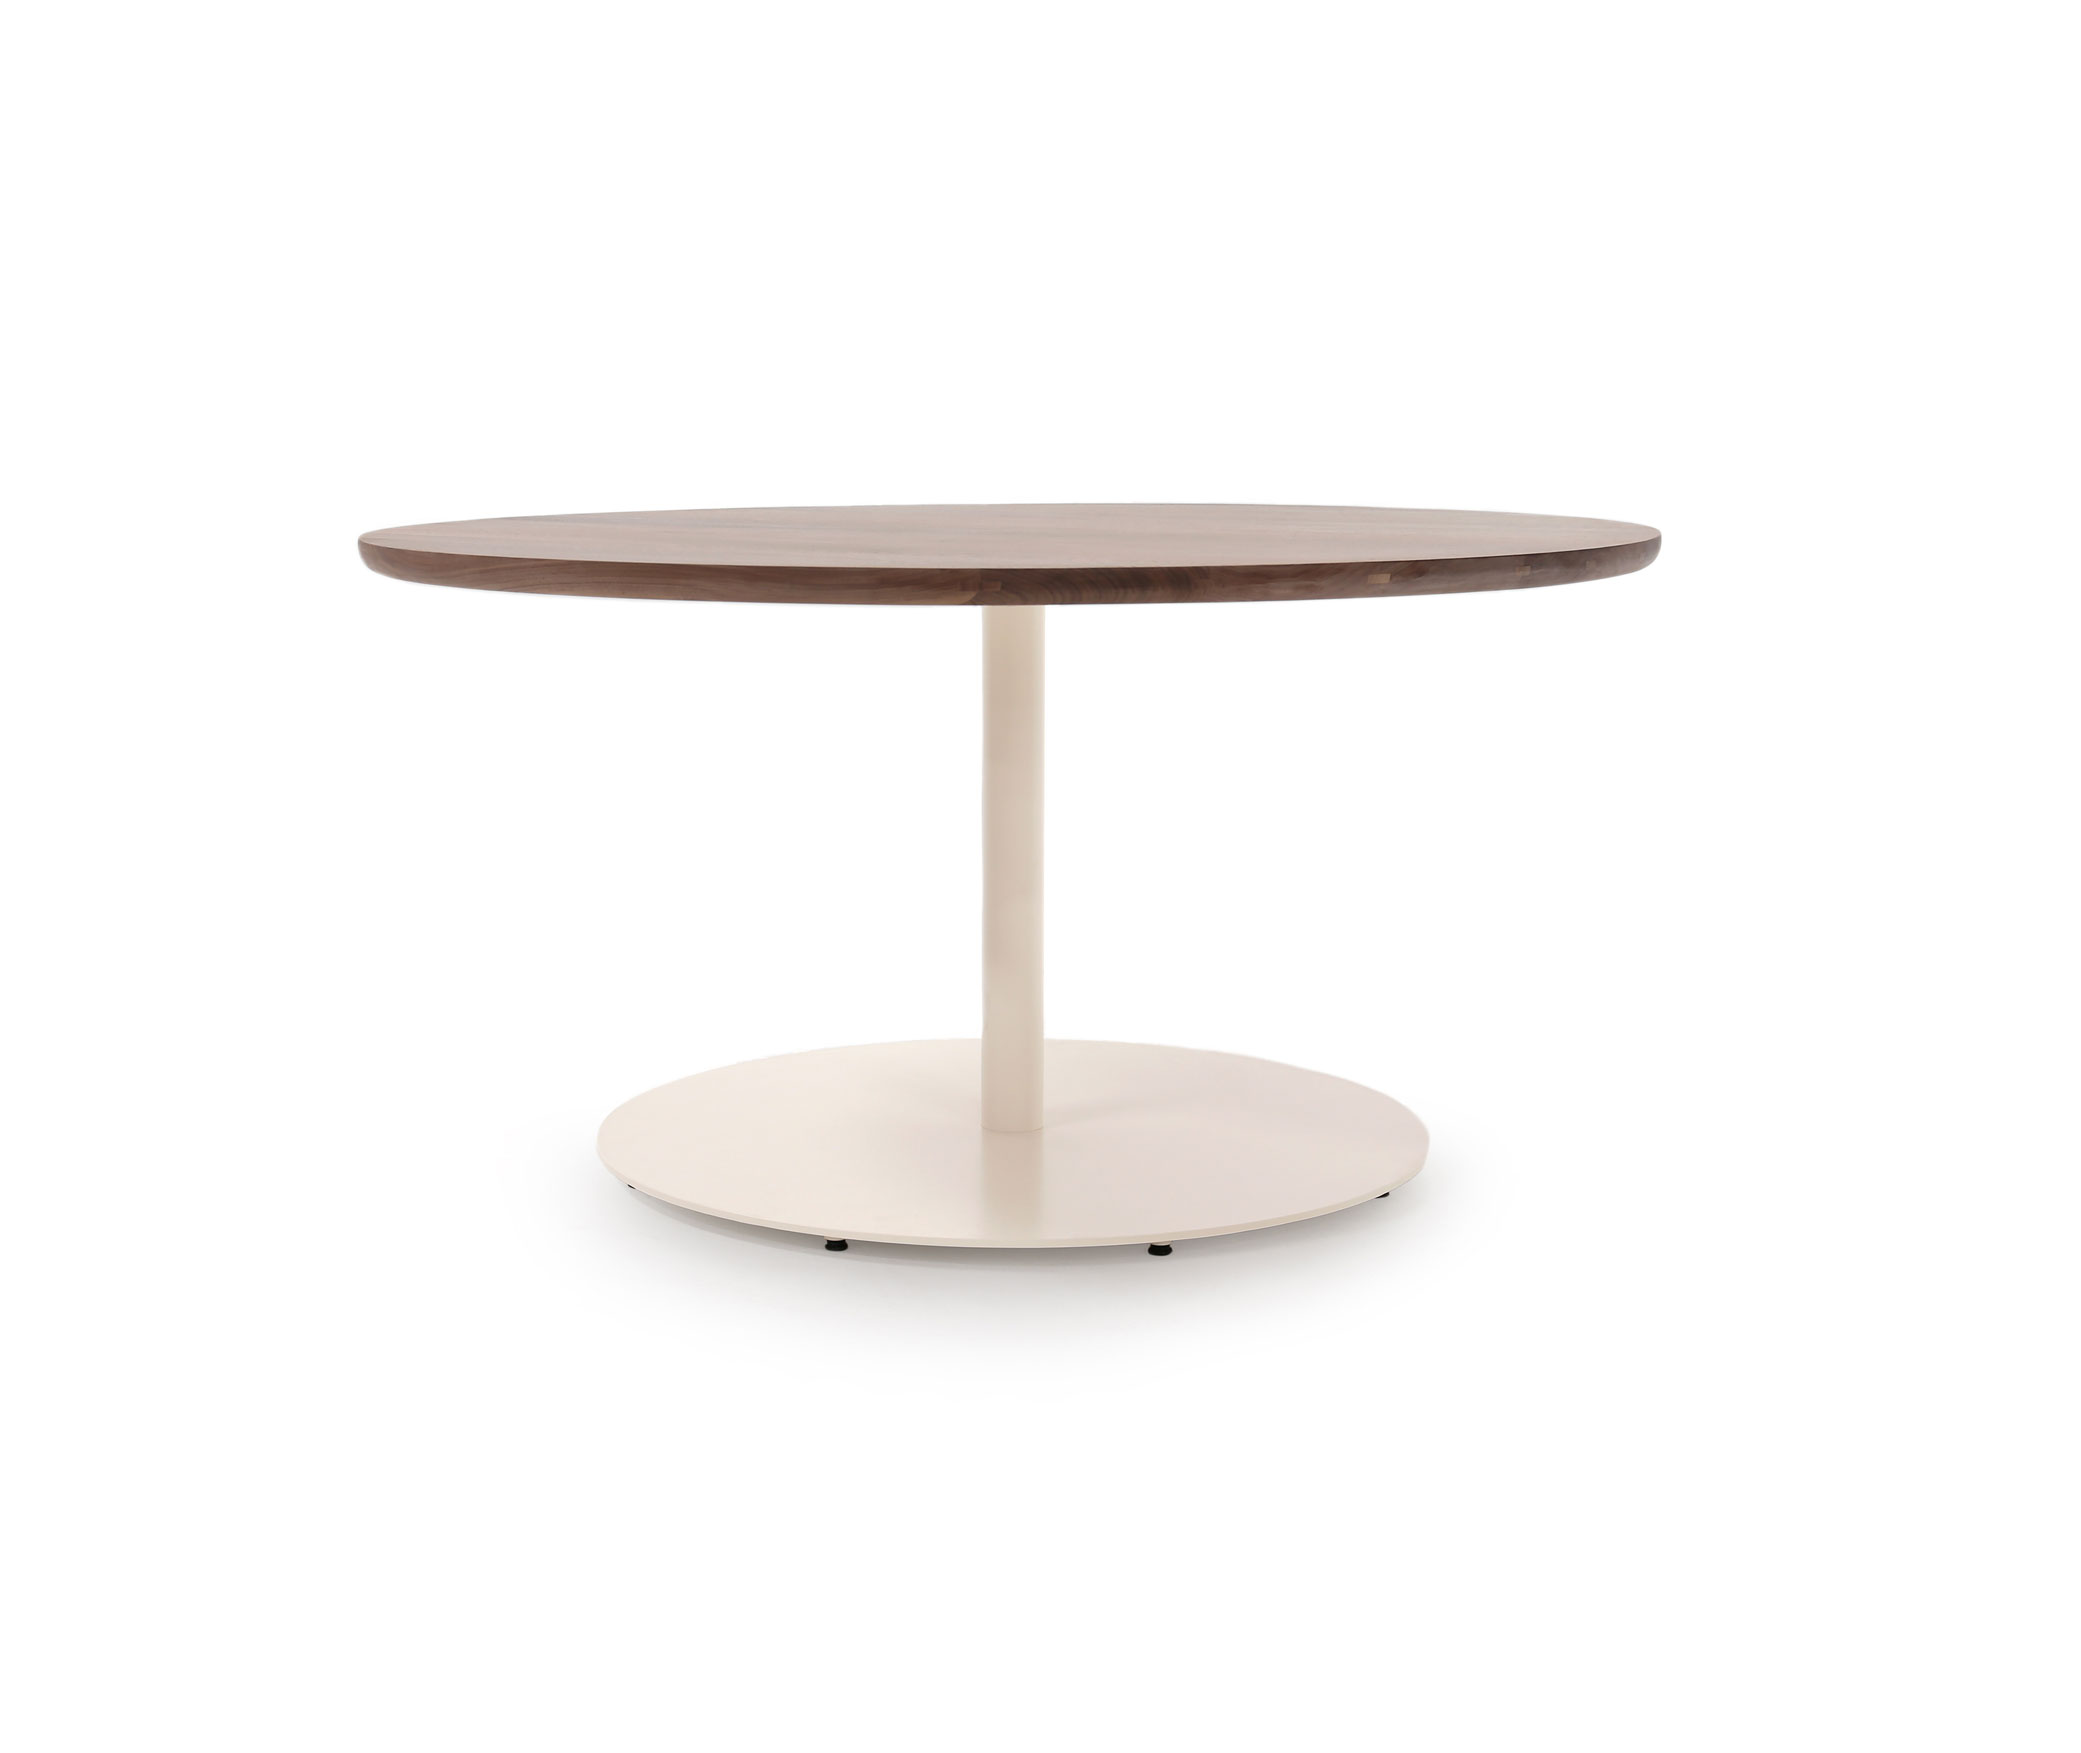 Verellen_Lisbon-60-Round-Dining-Table_int_products-1